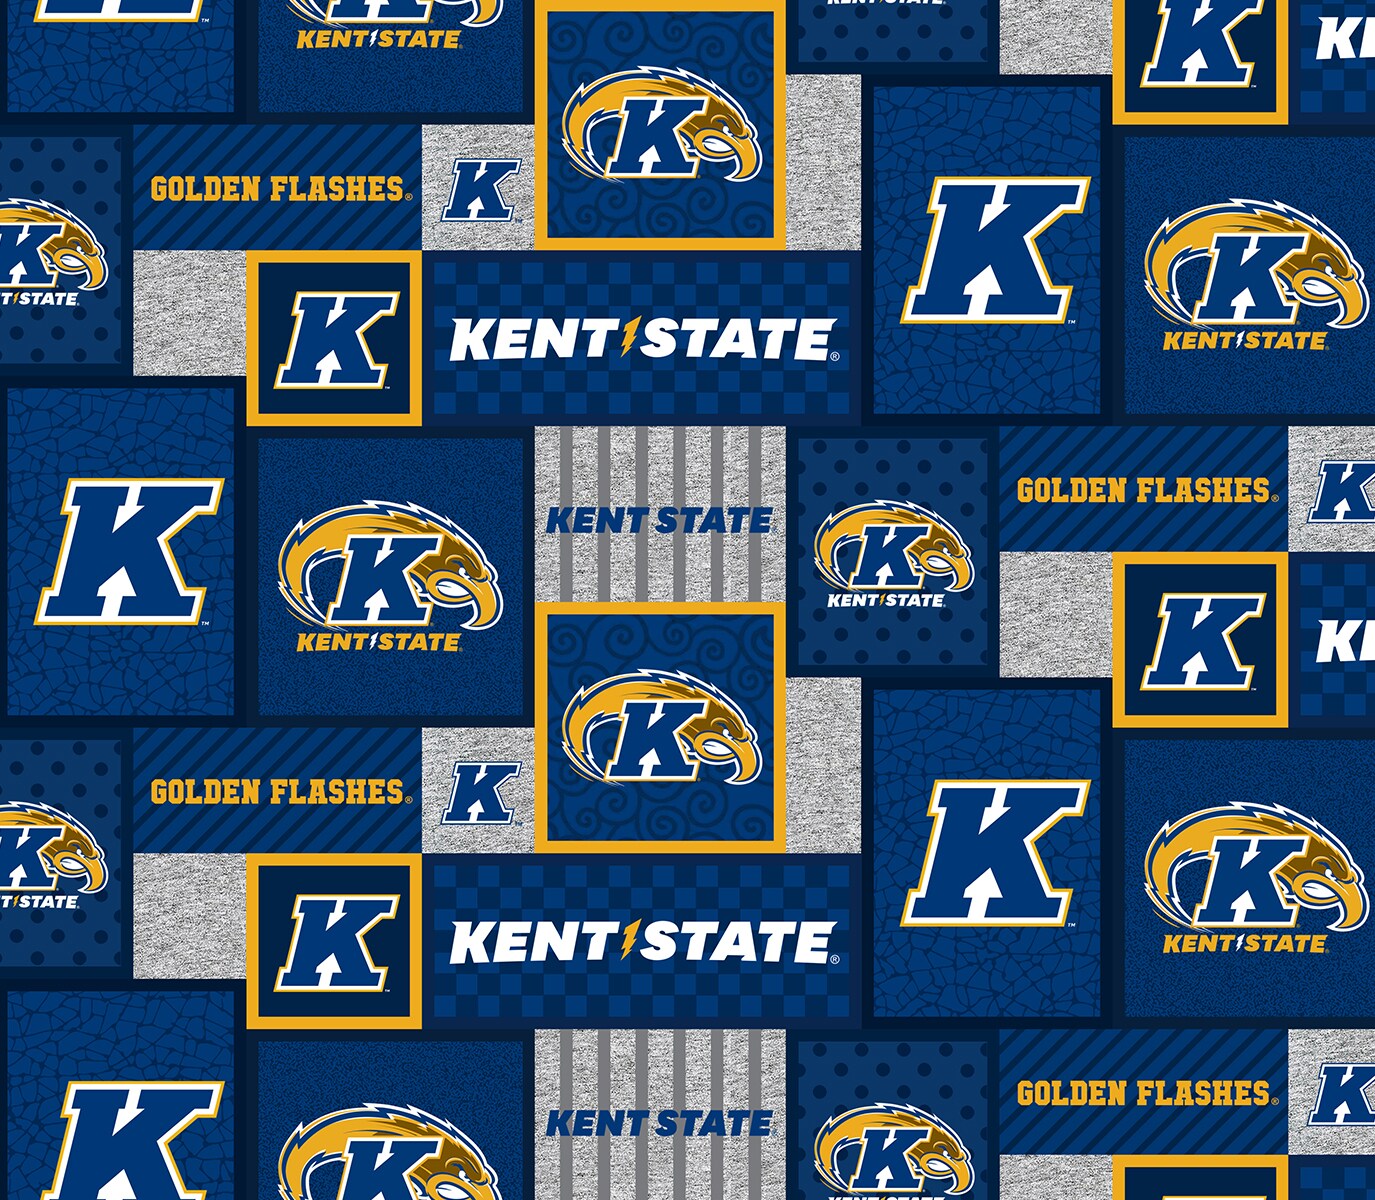 Sykel Enterprises-Kent State University Fleece Fabric-Kent State Golden Flashes College Patch Fleece Blanket Fabric-Sold by the yard